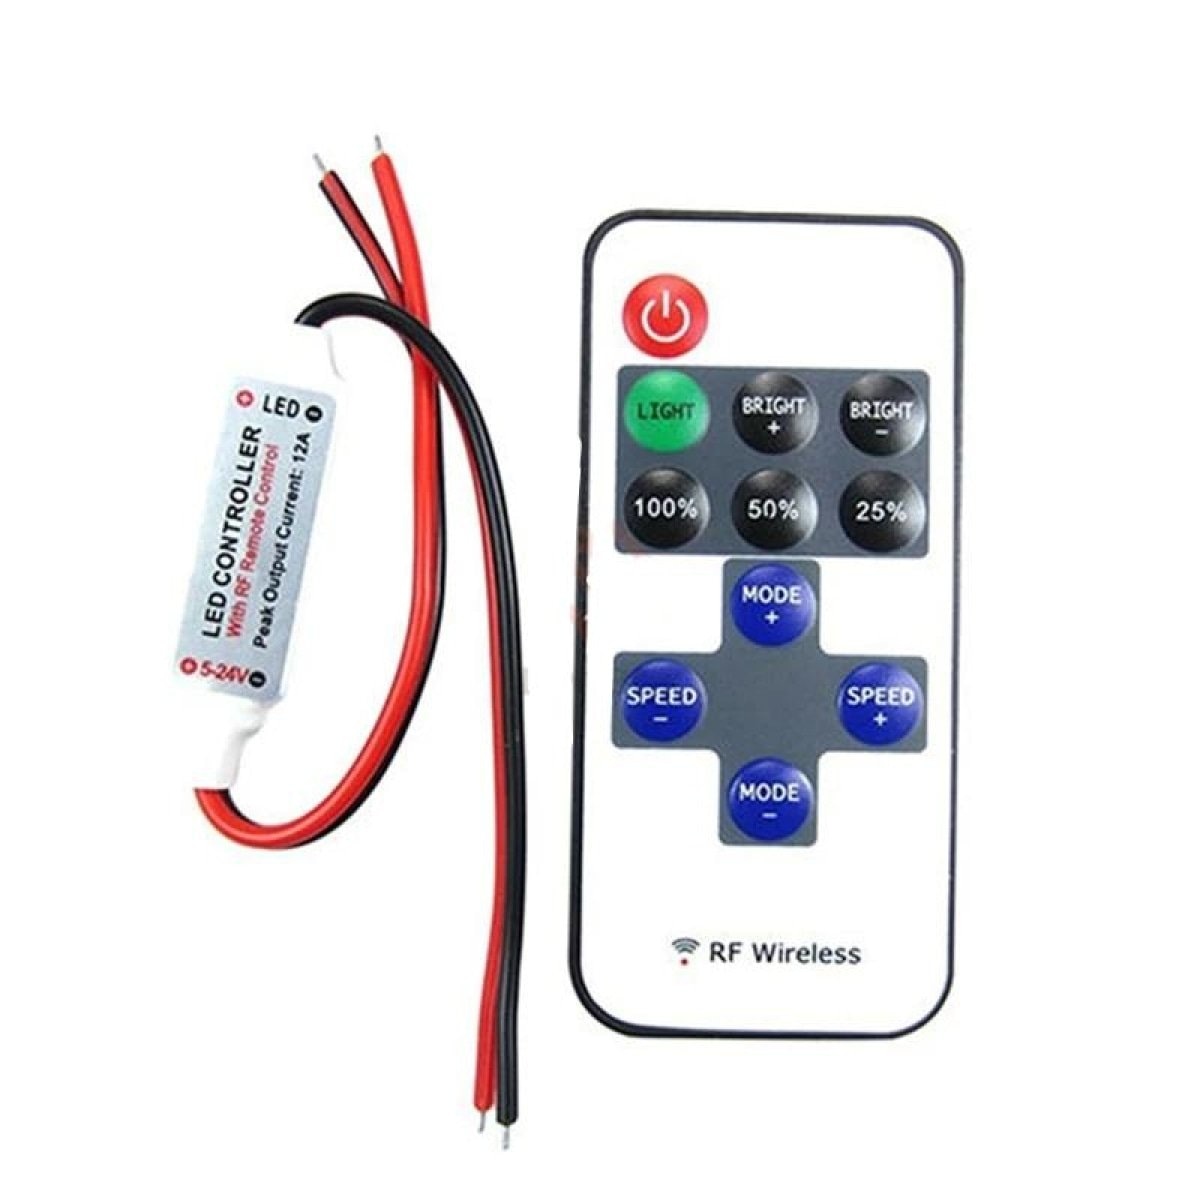 LED Dimmer Remote Control and Receiver Module - Battery Powered